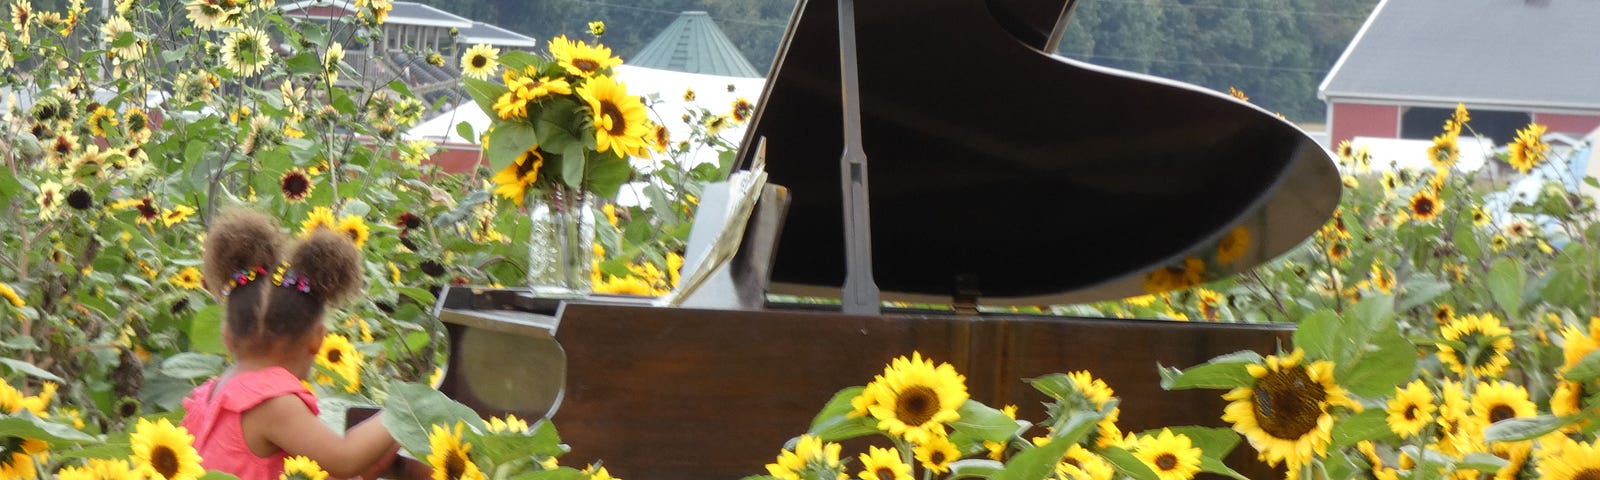 Piano in a sunflower field, with child sitting at it